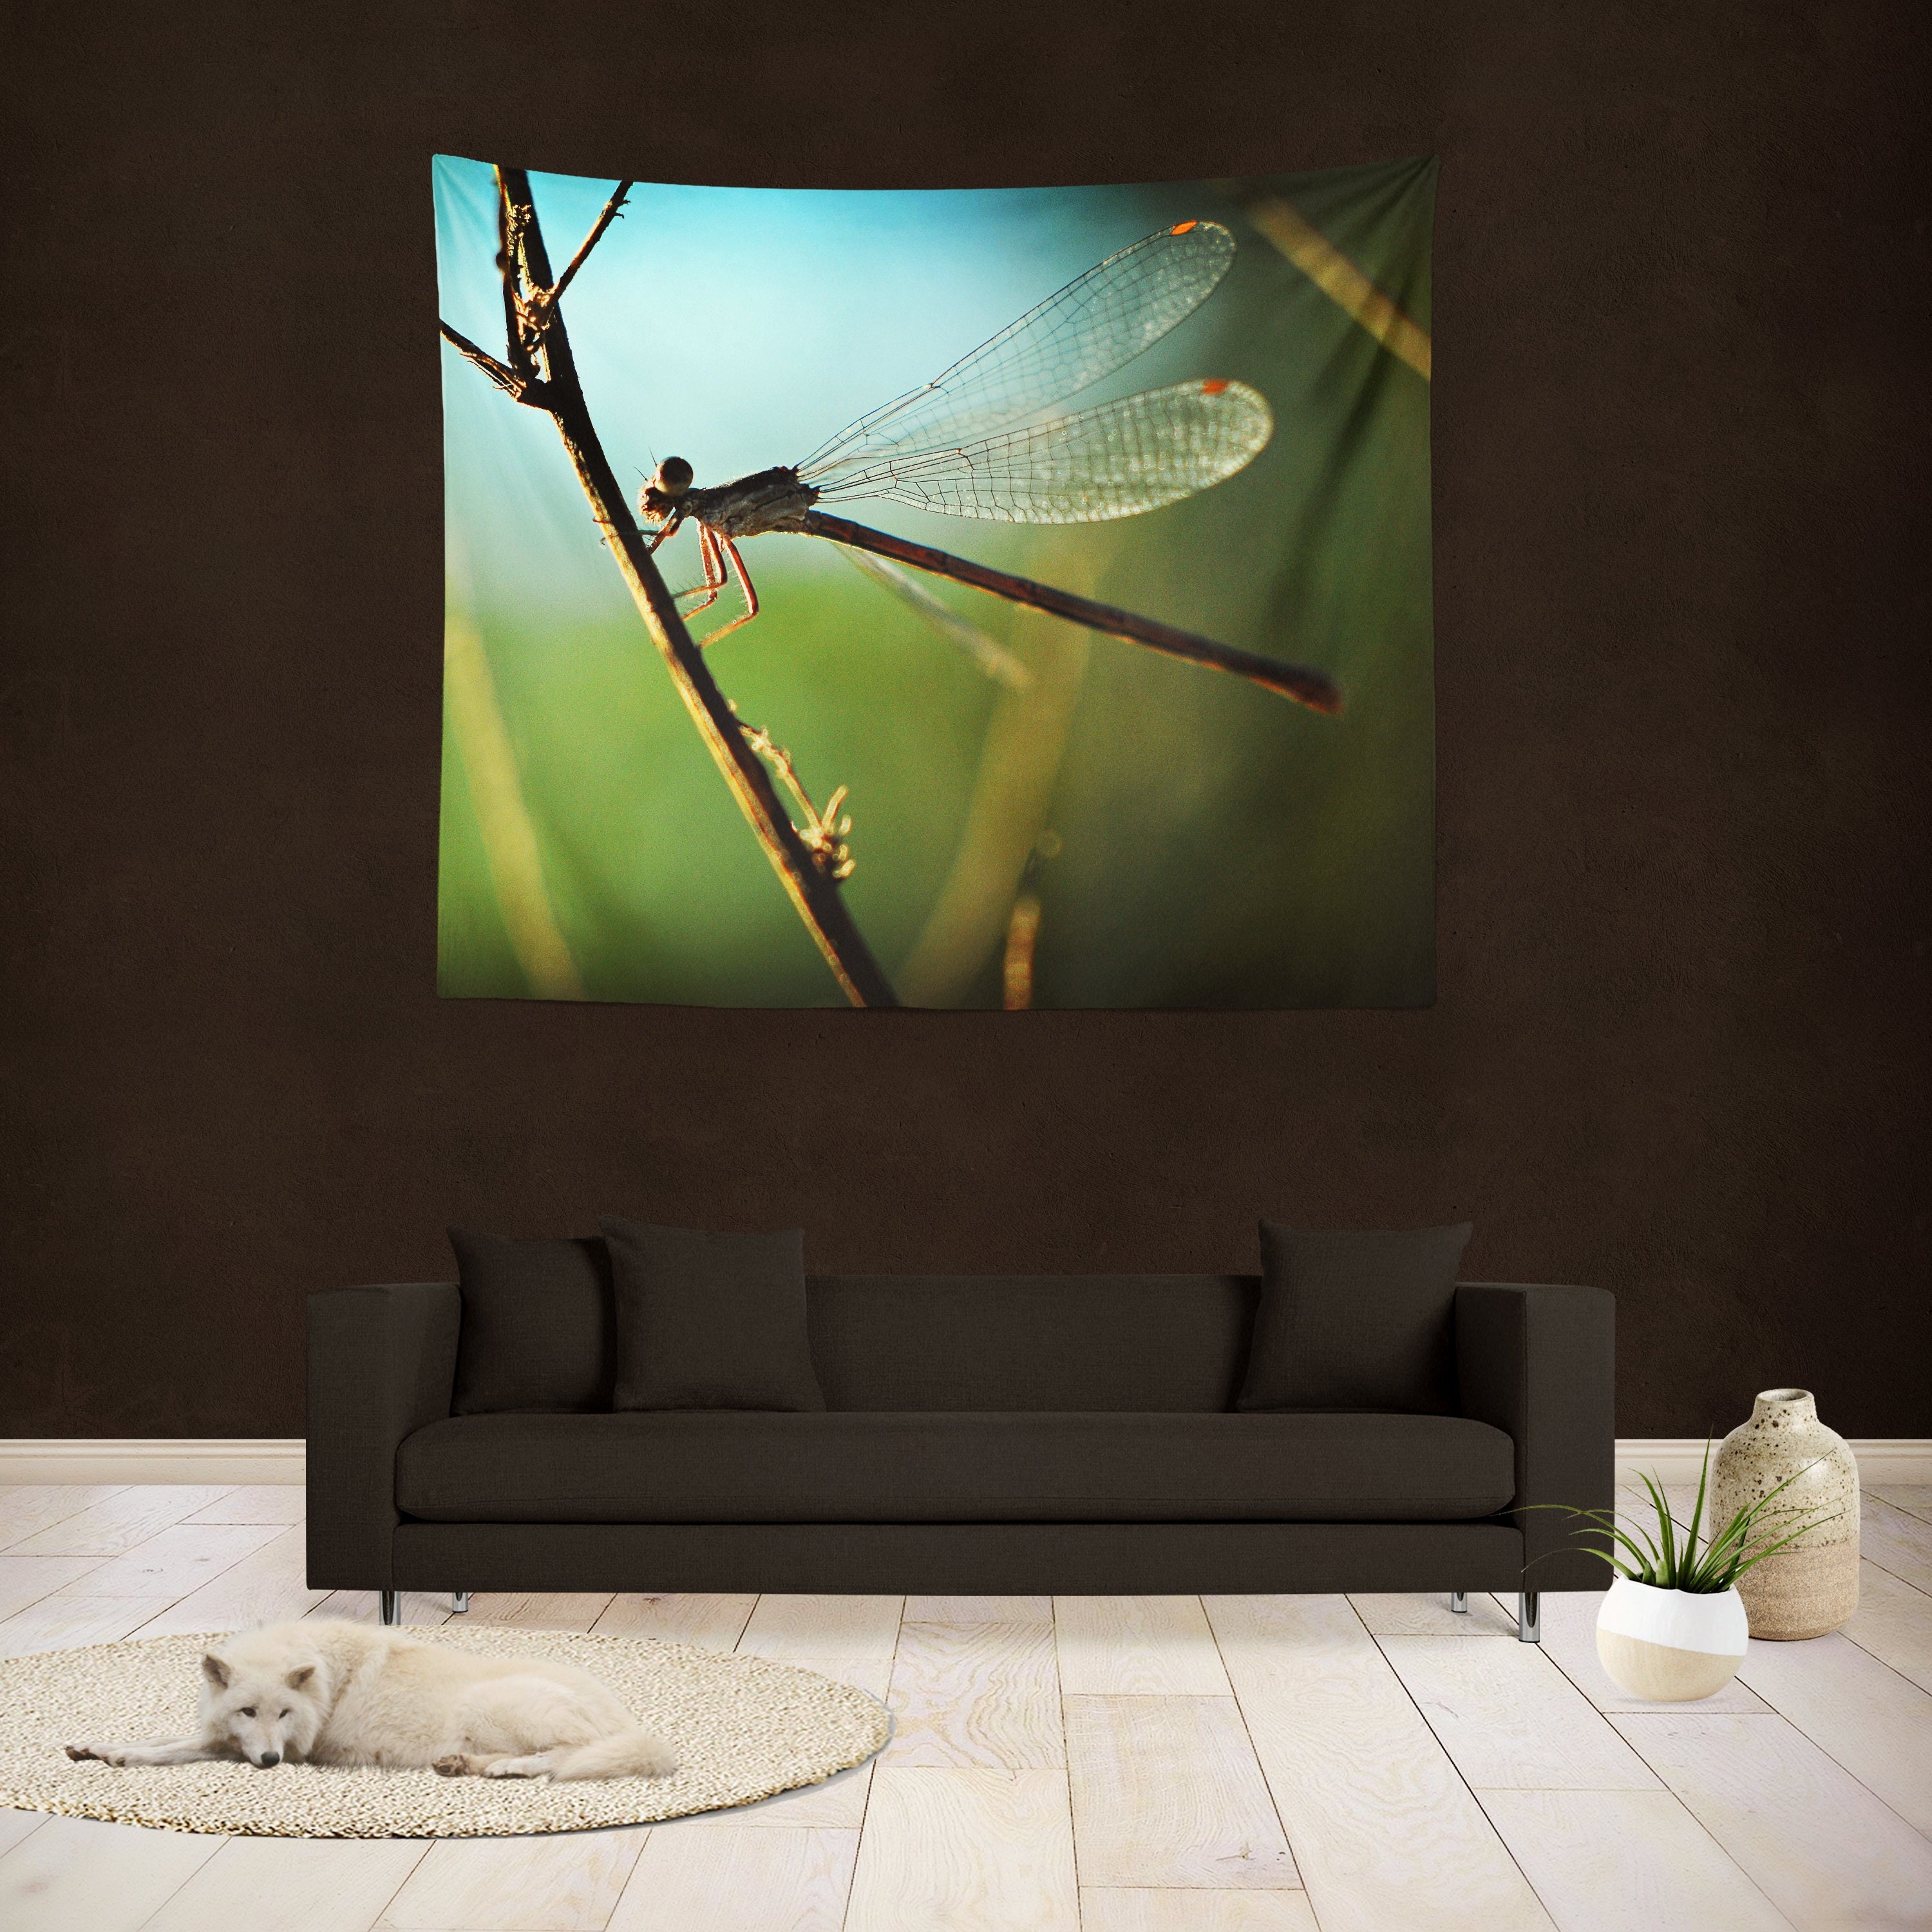 Dragonfly on Colorful Background Tapestry Wall Hanging Living Room Bedroom Decor 